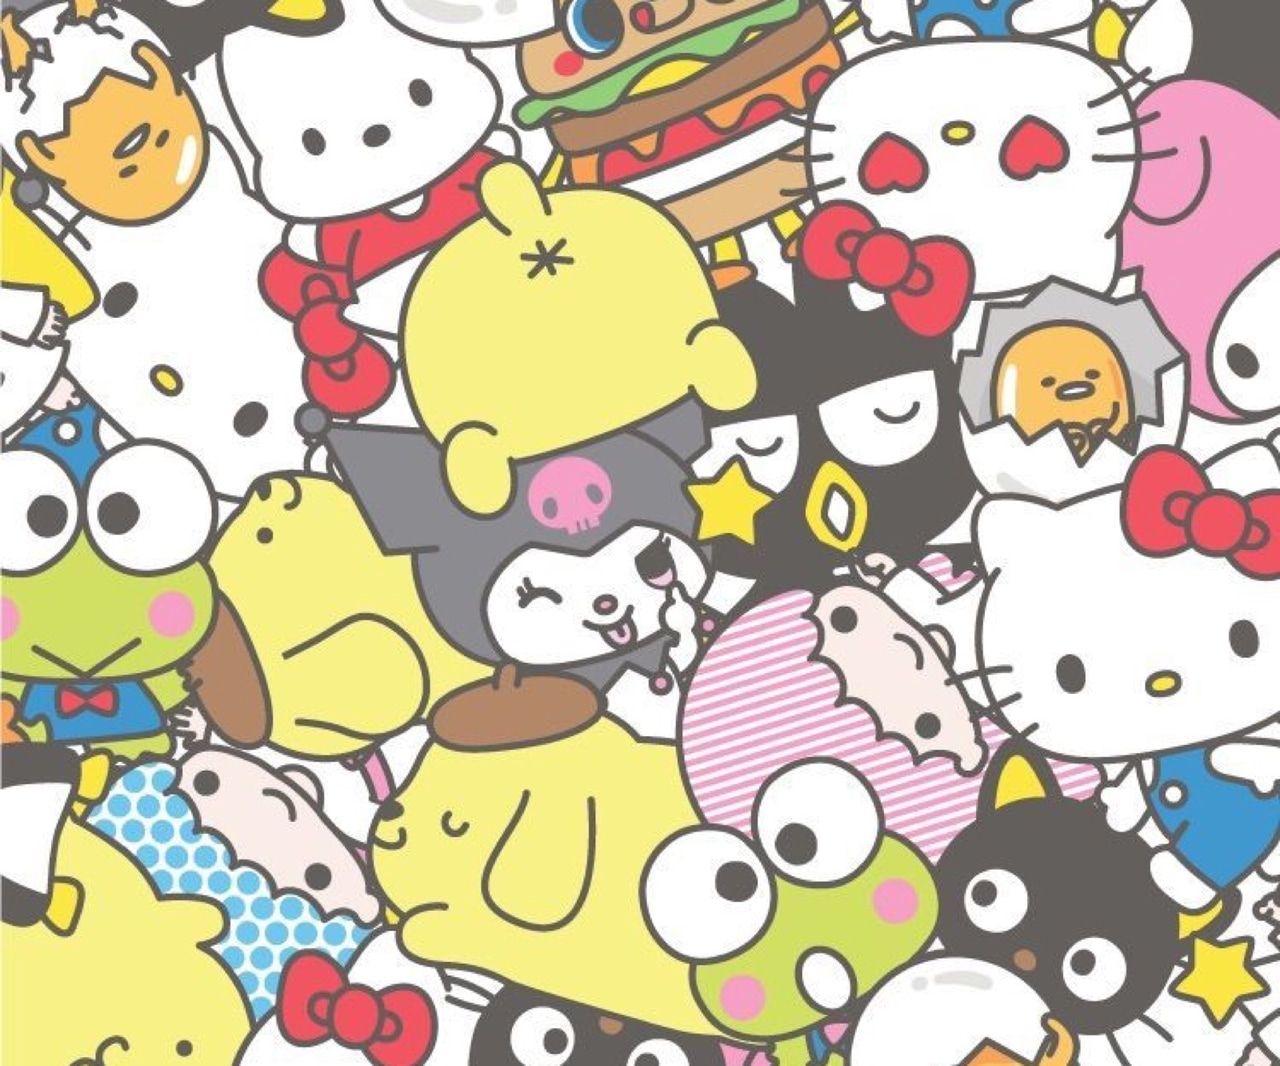 A hello kitty pattern with lots of different characters - Keroppi